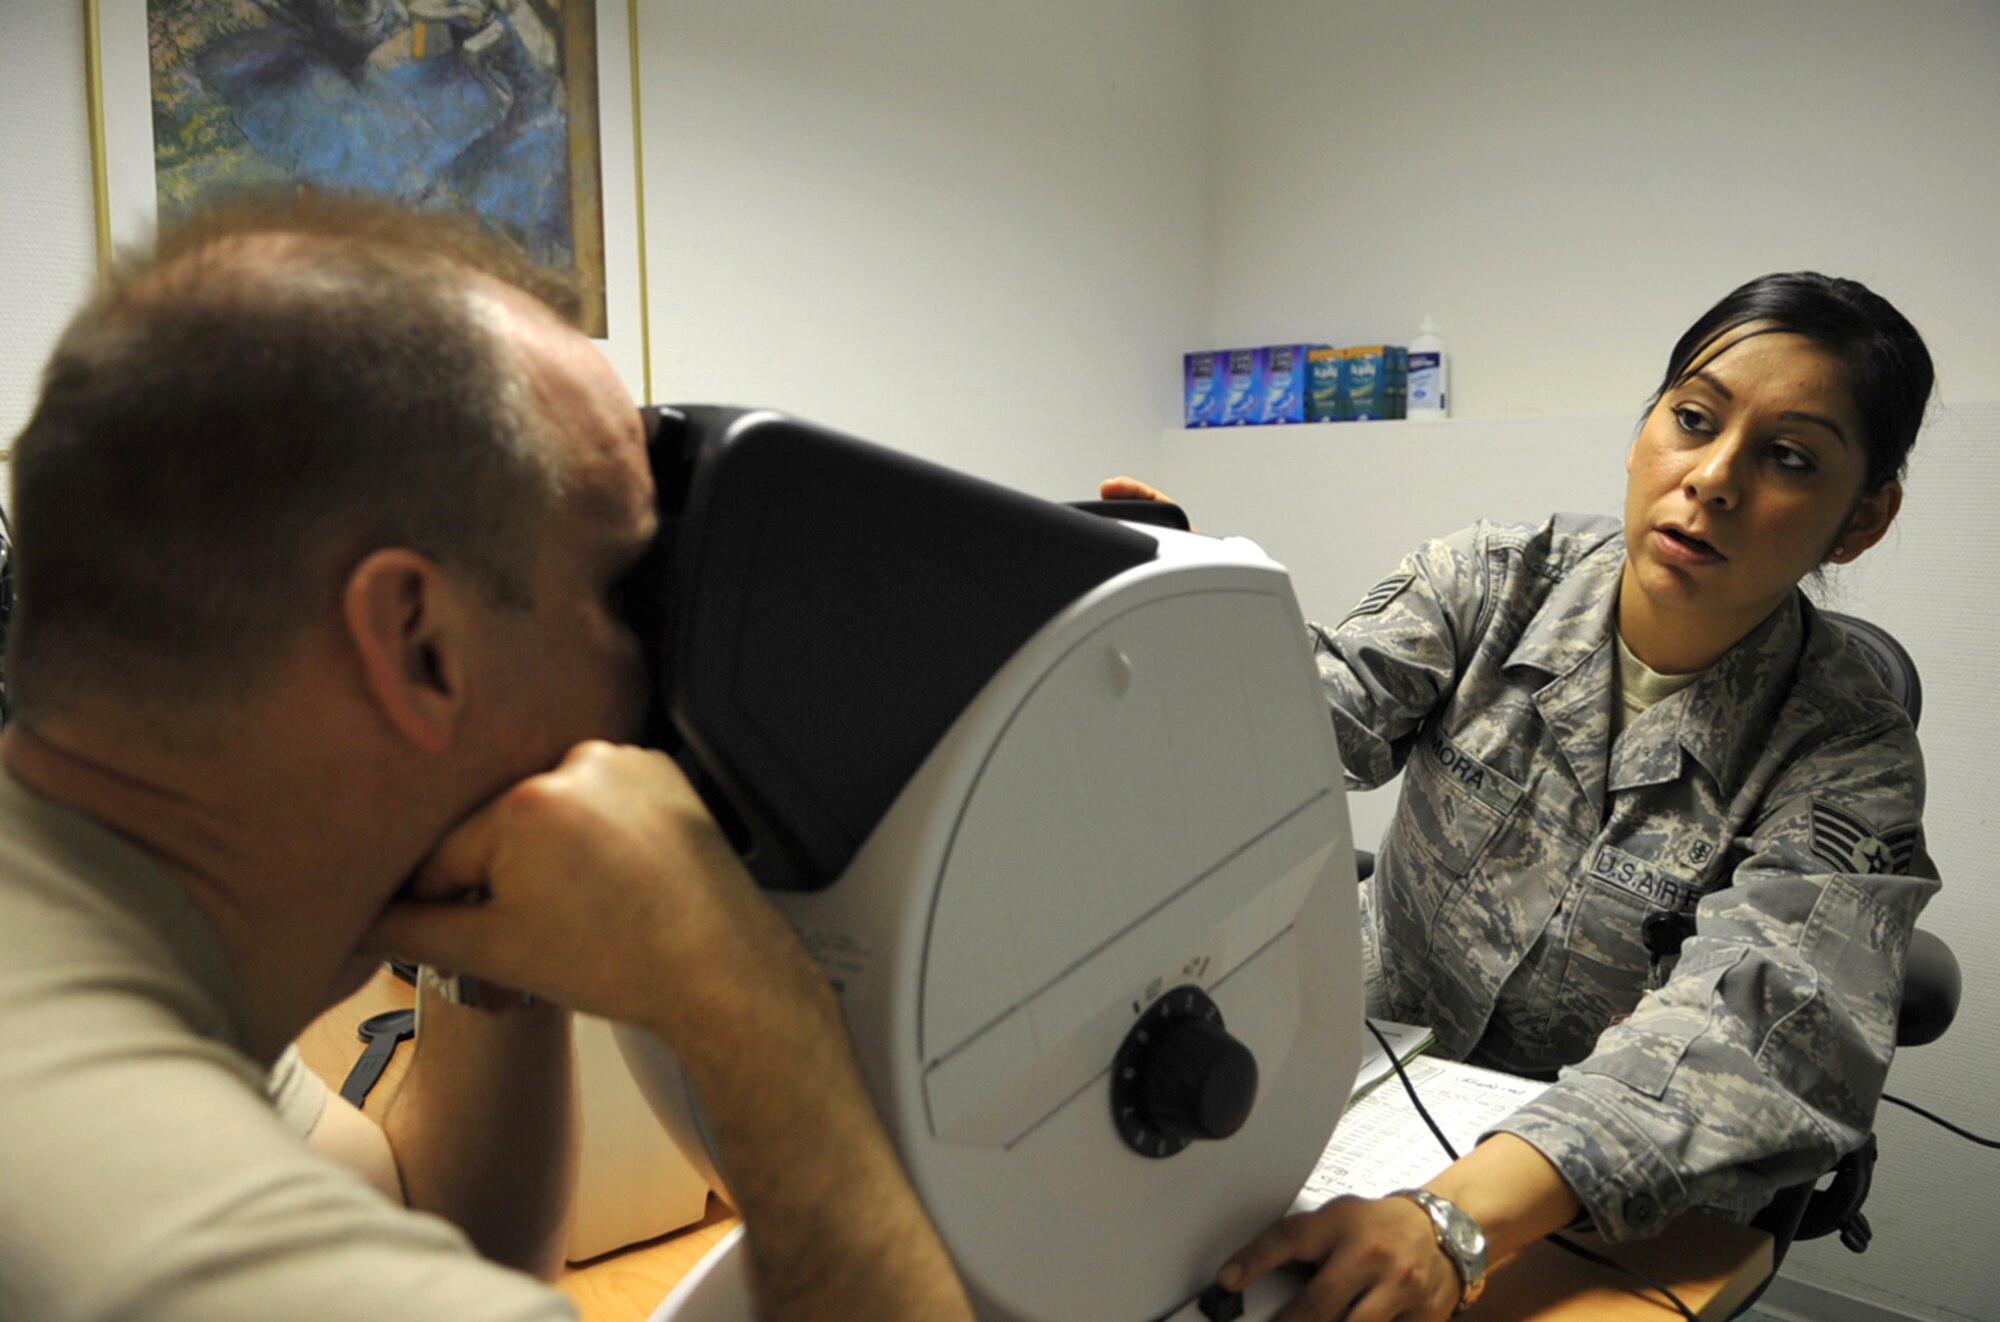 U.S. Army Lt.Col. Charles Davis, Office of Defense Cooperation Croatia, gets an eye exam from U.S. Air Force Staff Sgt. Liliana Zamora, medical technician, 86th Medical Group Special Operations during the U.S. European Command European Strategy Conference, Ramstein Air Base, Germany, March 2, 2010. During the week-long conference, attendees were able to bring all their medical care up to date thanks to the hard work of the 86th Medical Group and their concept of “Conference Medicine.” (U.S. Air Force photo by Senior AIrman Tony R. Ritter)